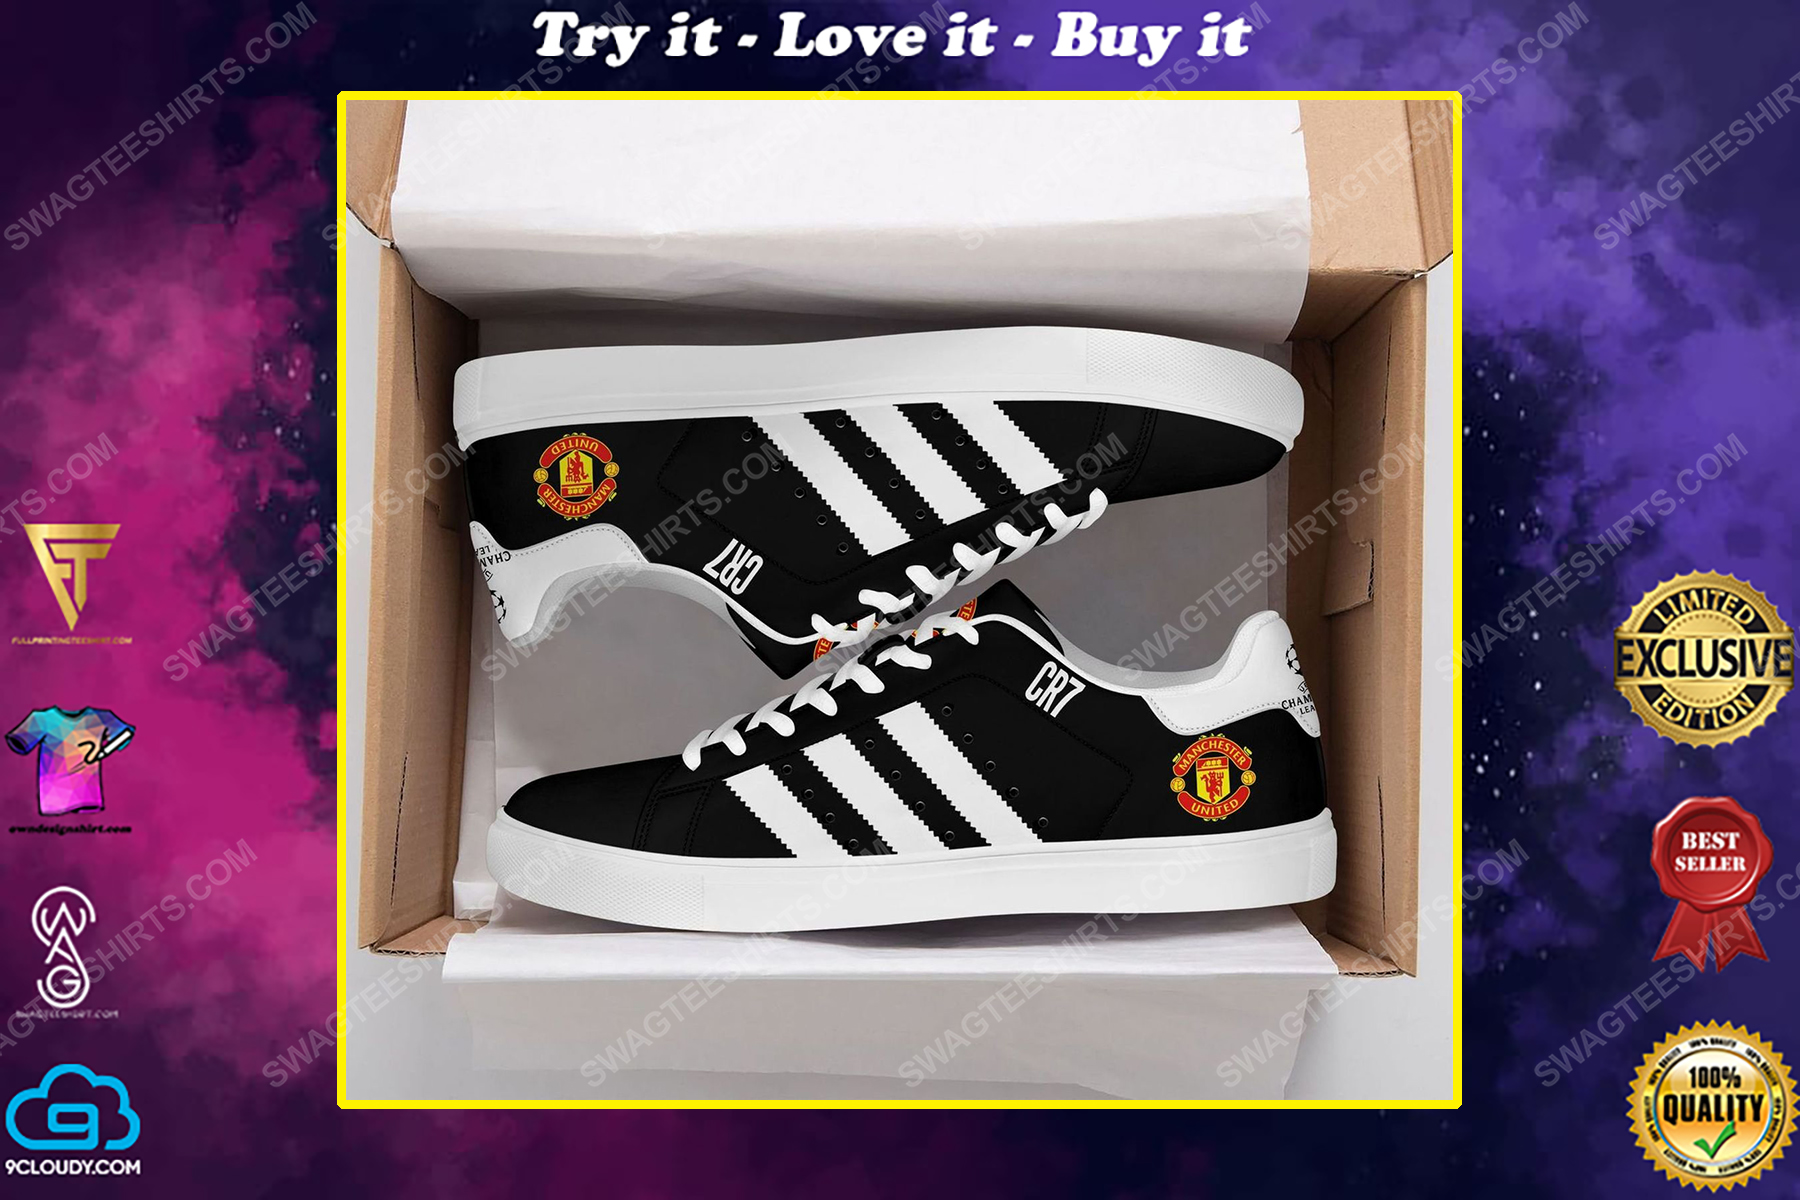 Manchester united football club cr7 stan smith shoes